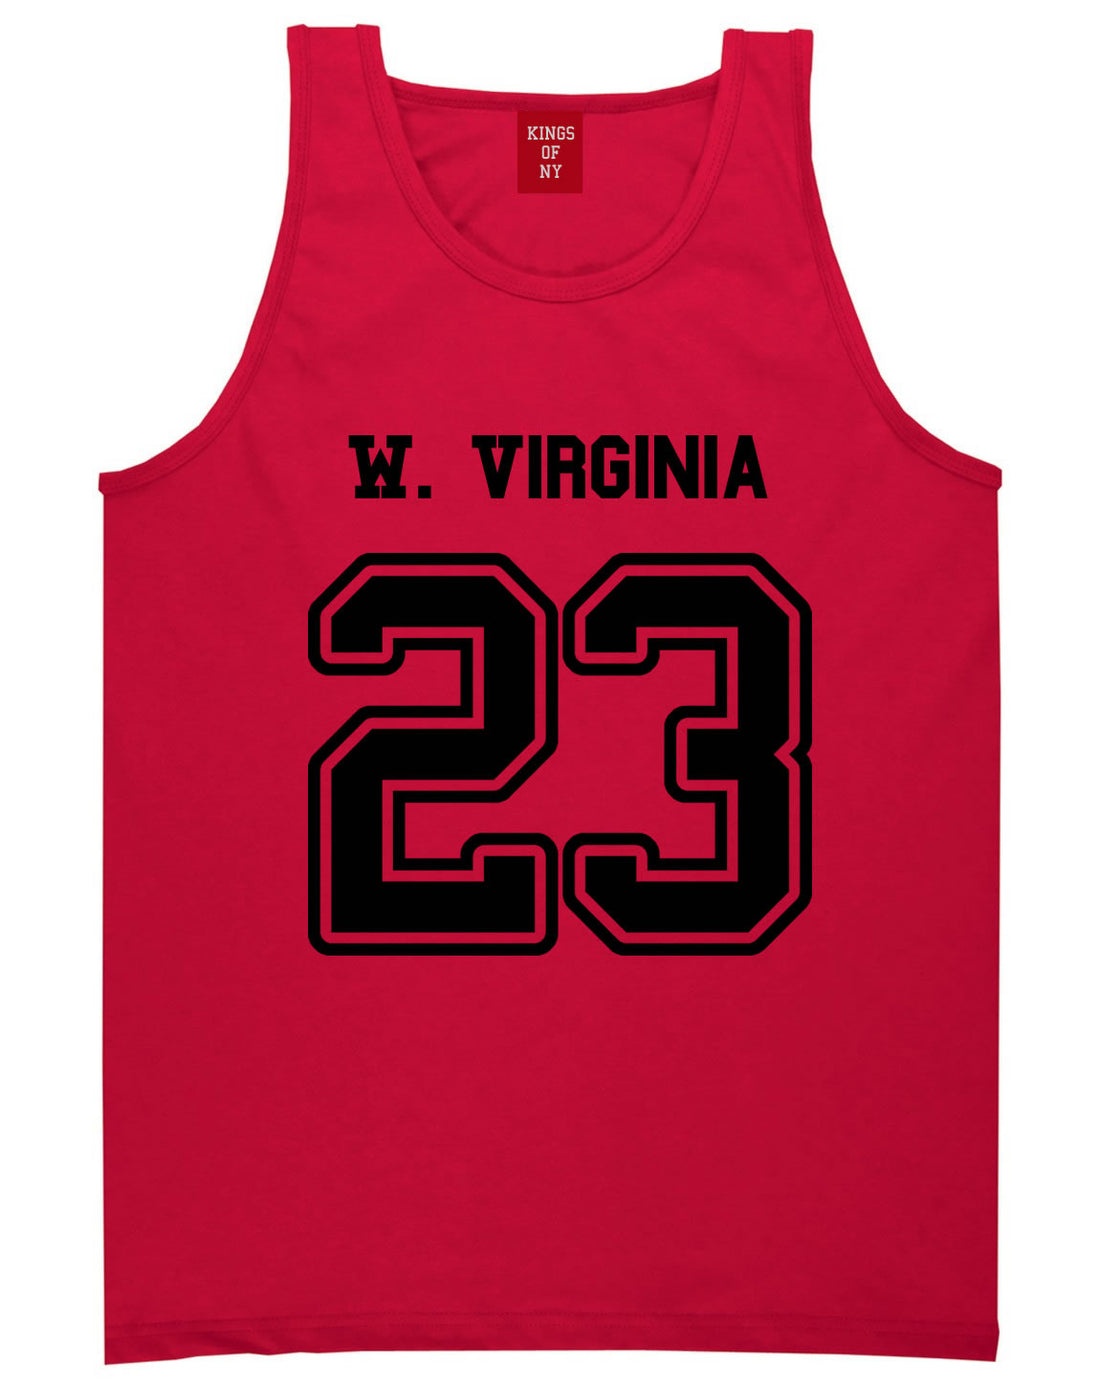 Sport Style West Virginia 23 Team State Jersey Mens Tank Top By Kings Of NY